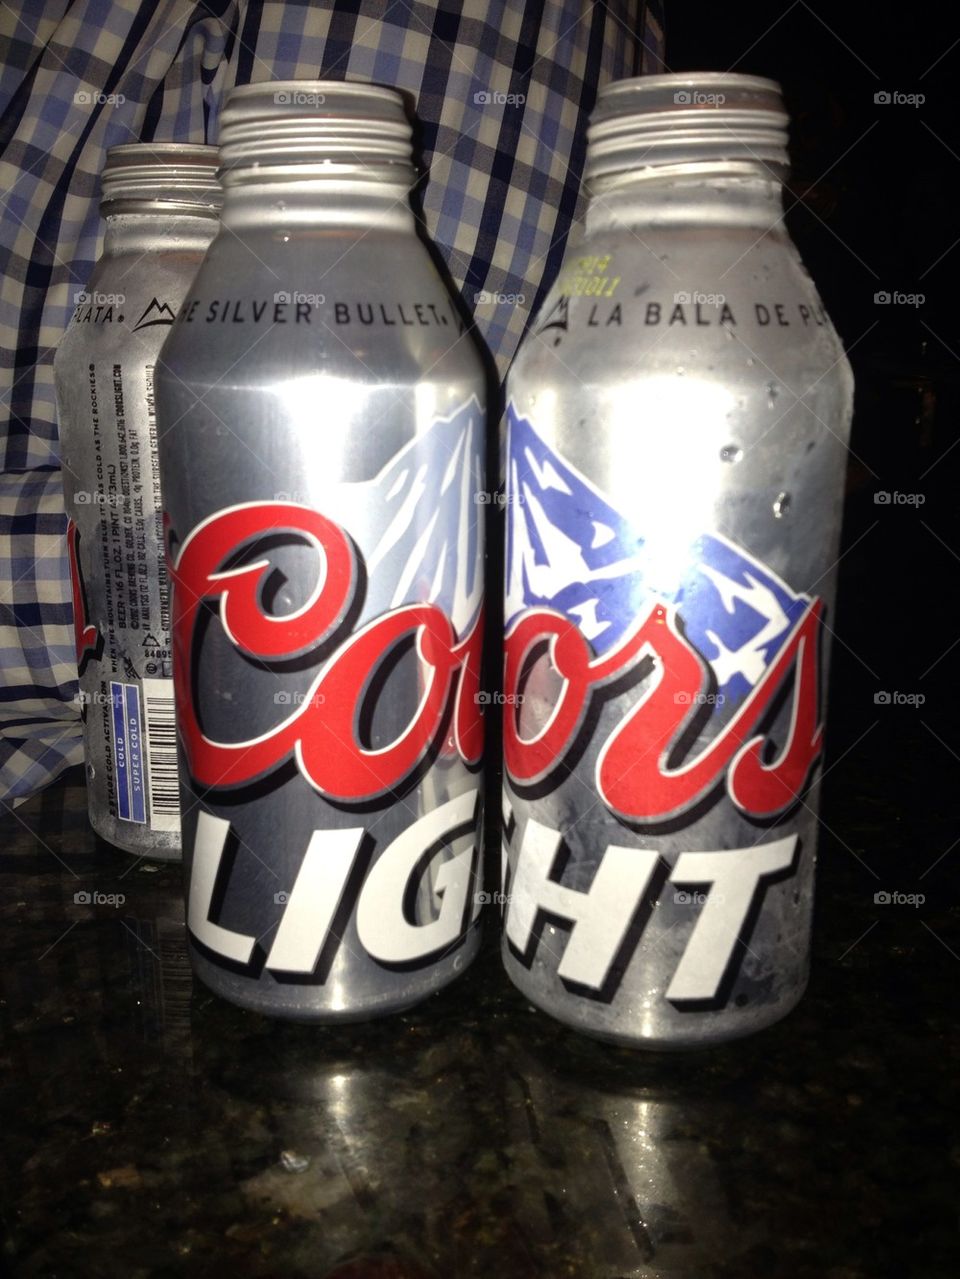 Coors cans